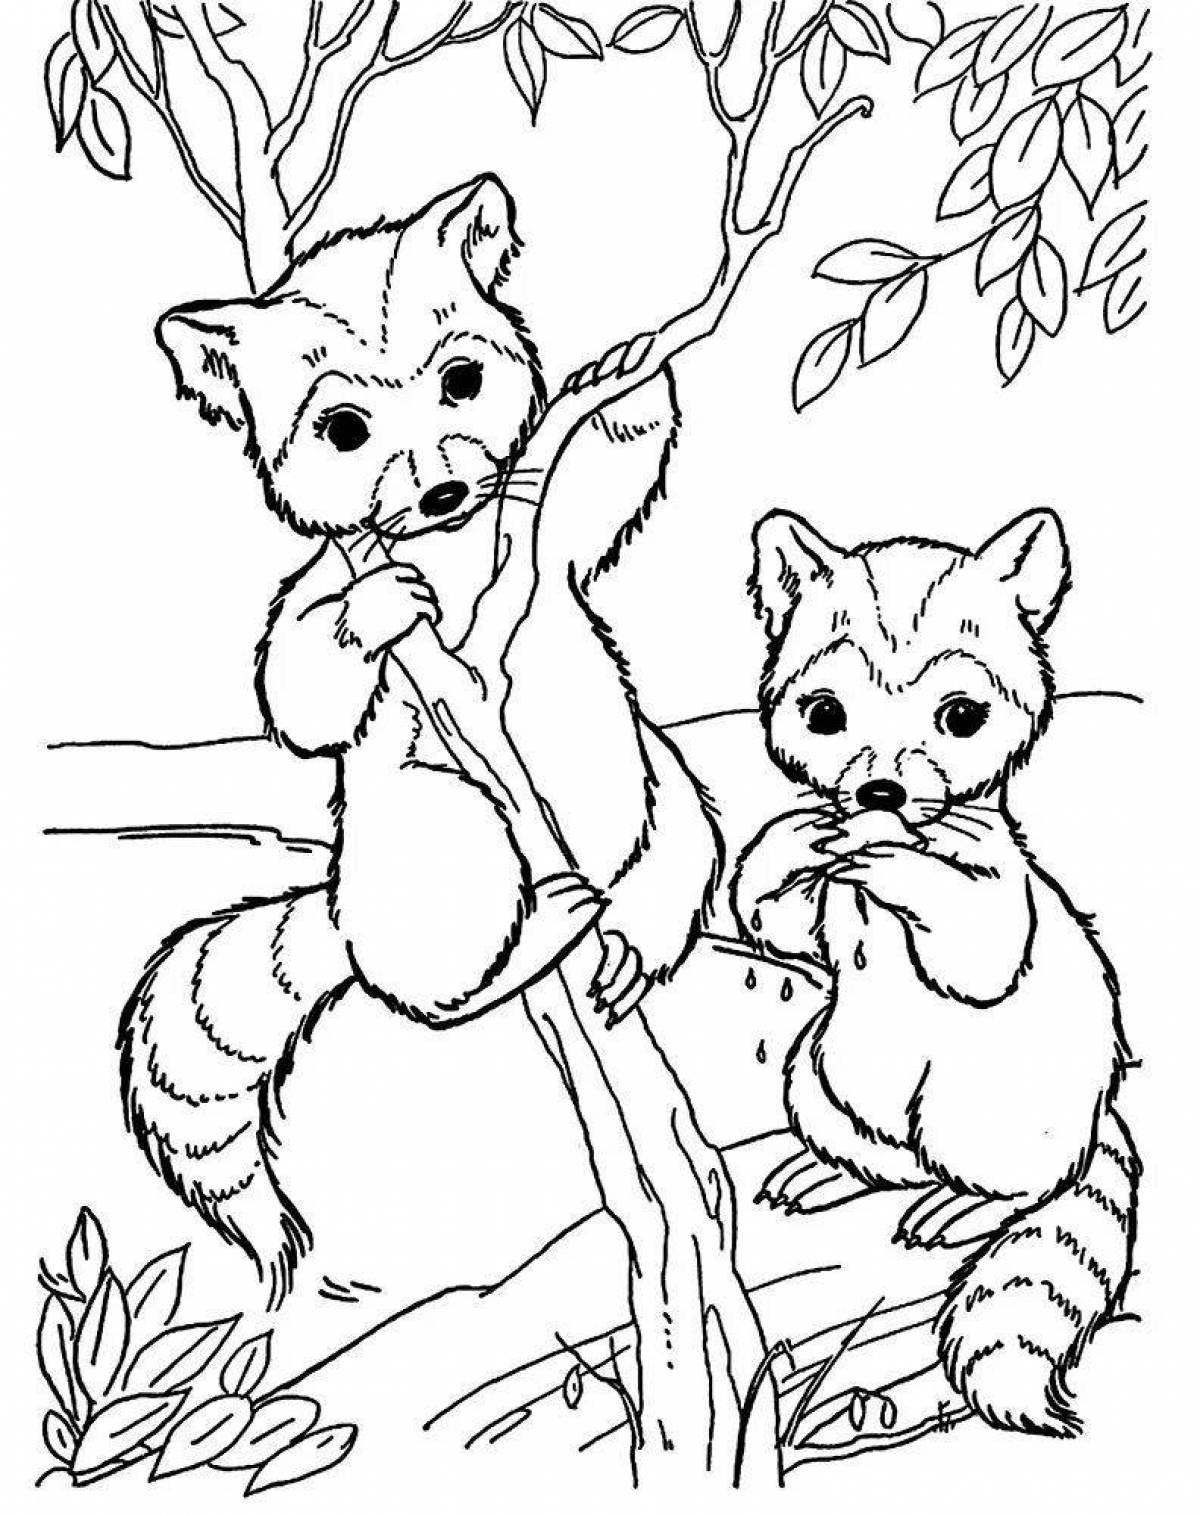 Fabulous wild animal coloring pages for girls